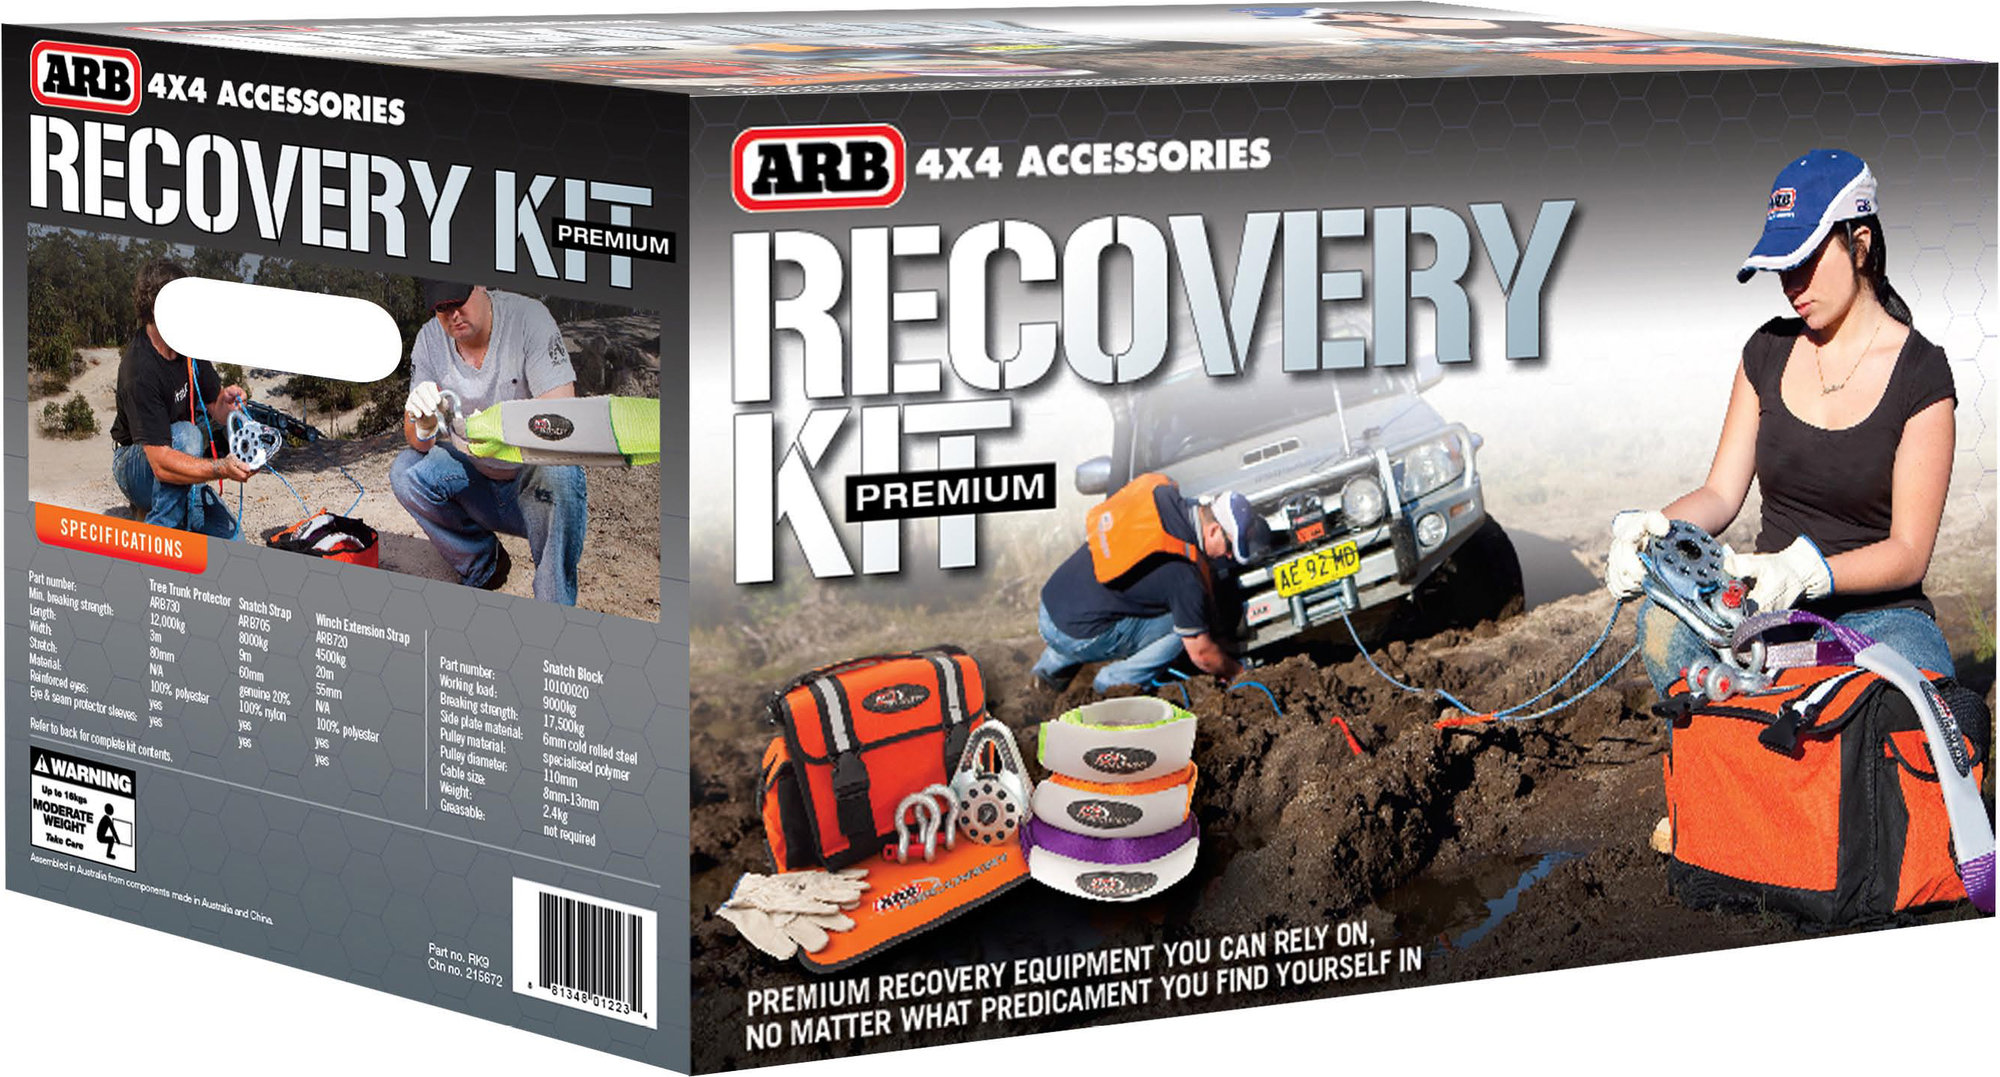 ARB RK9A Premium Recovery Kit